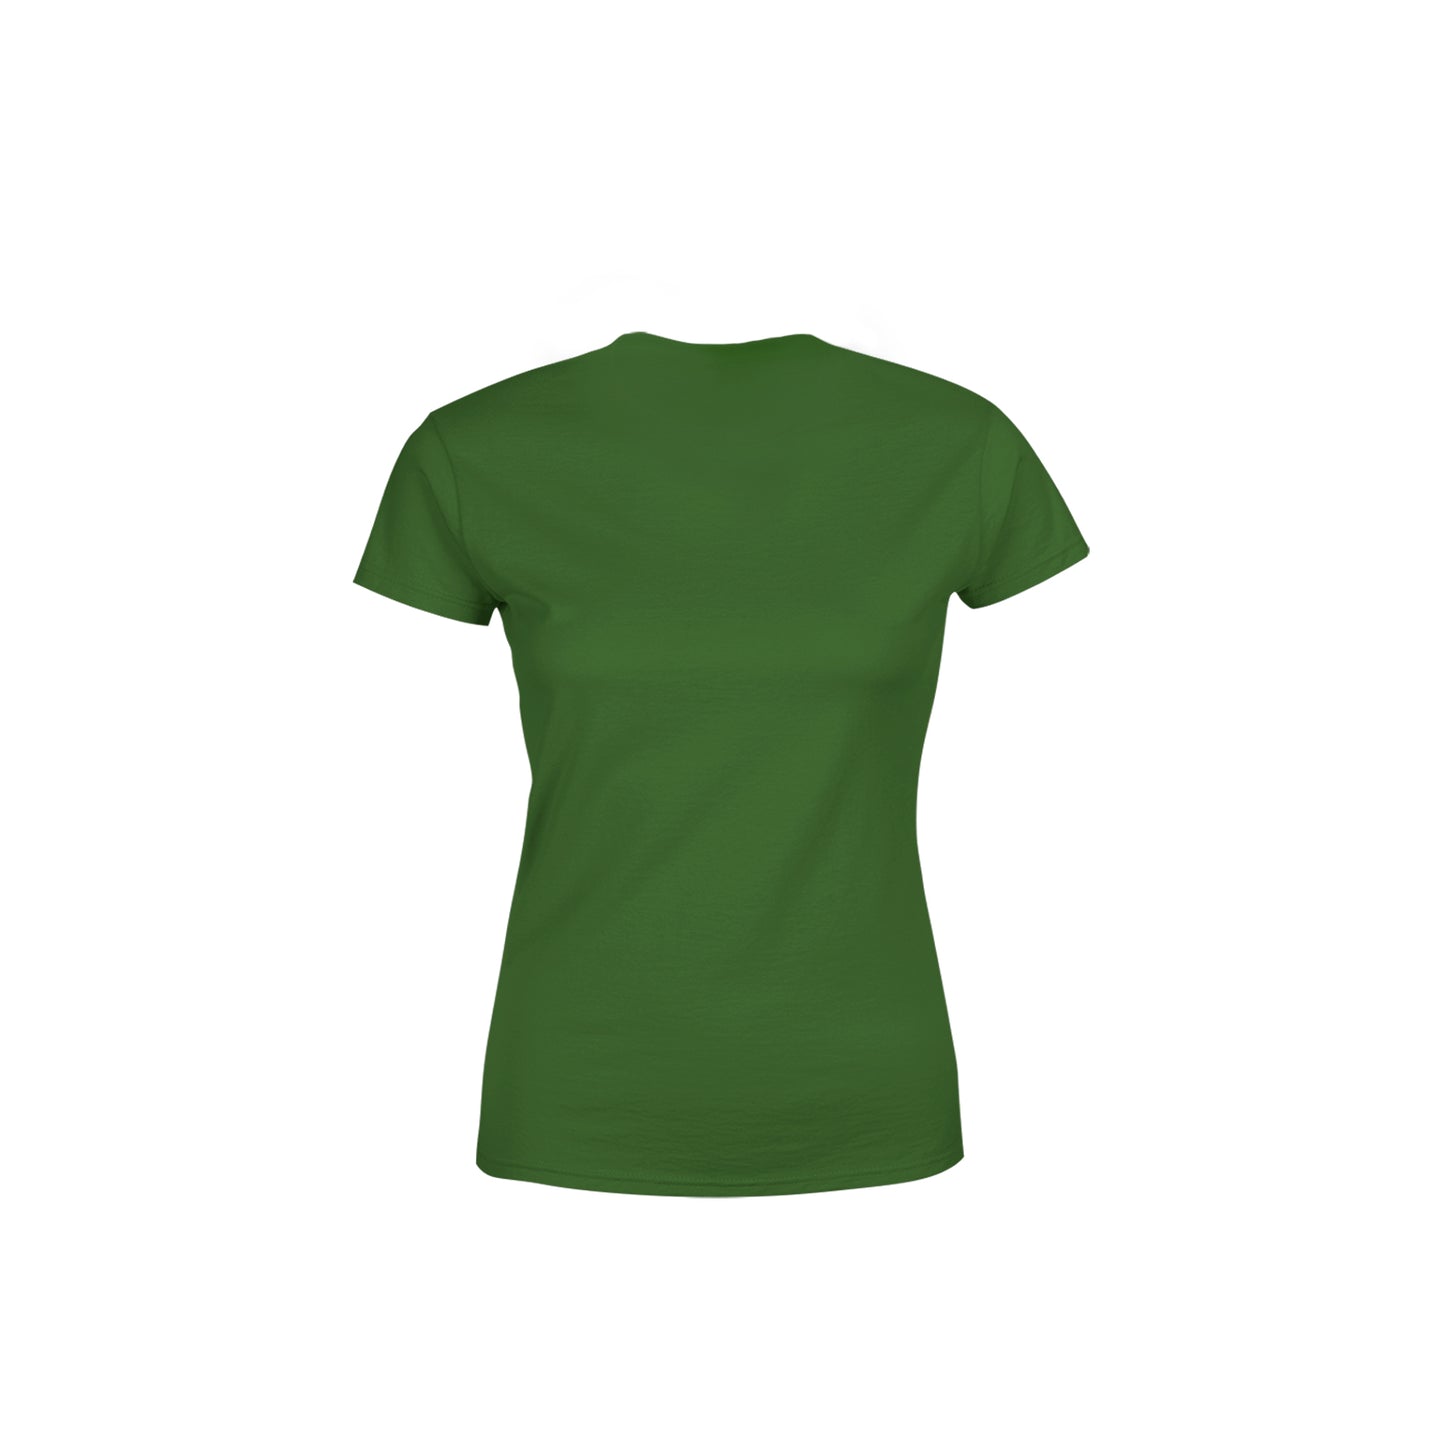 00 Number Women's T-Shirt (Olive Green)